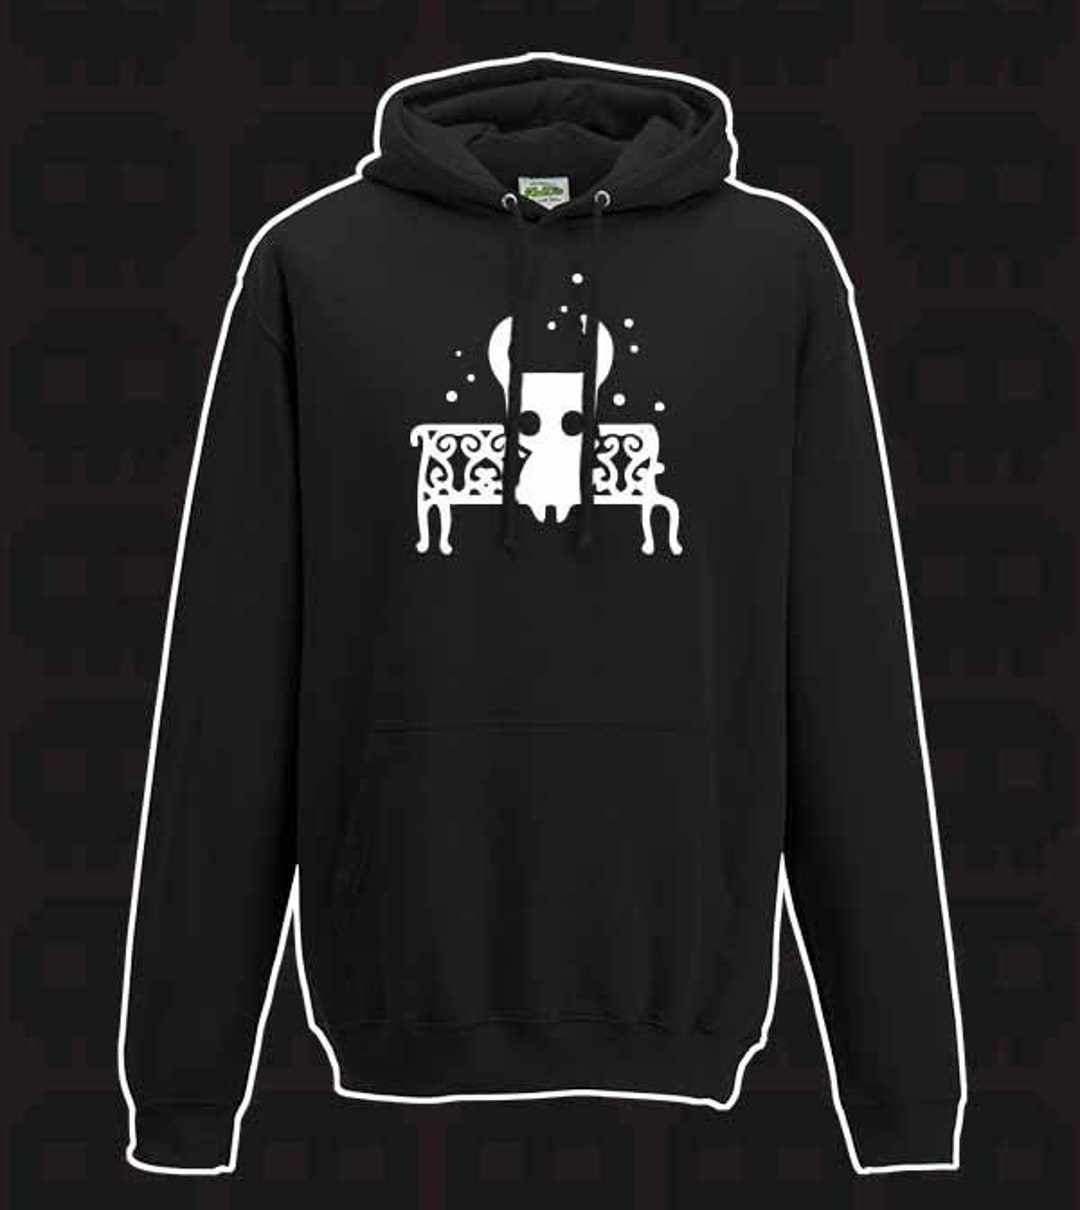 S-XXL Knight - Sweatshirt Sizes Silhouette Rest/save Hollow Hoodie/hooded Etsy